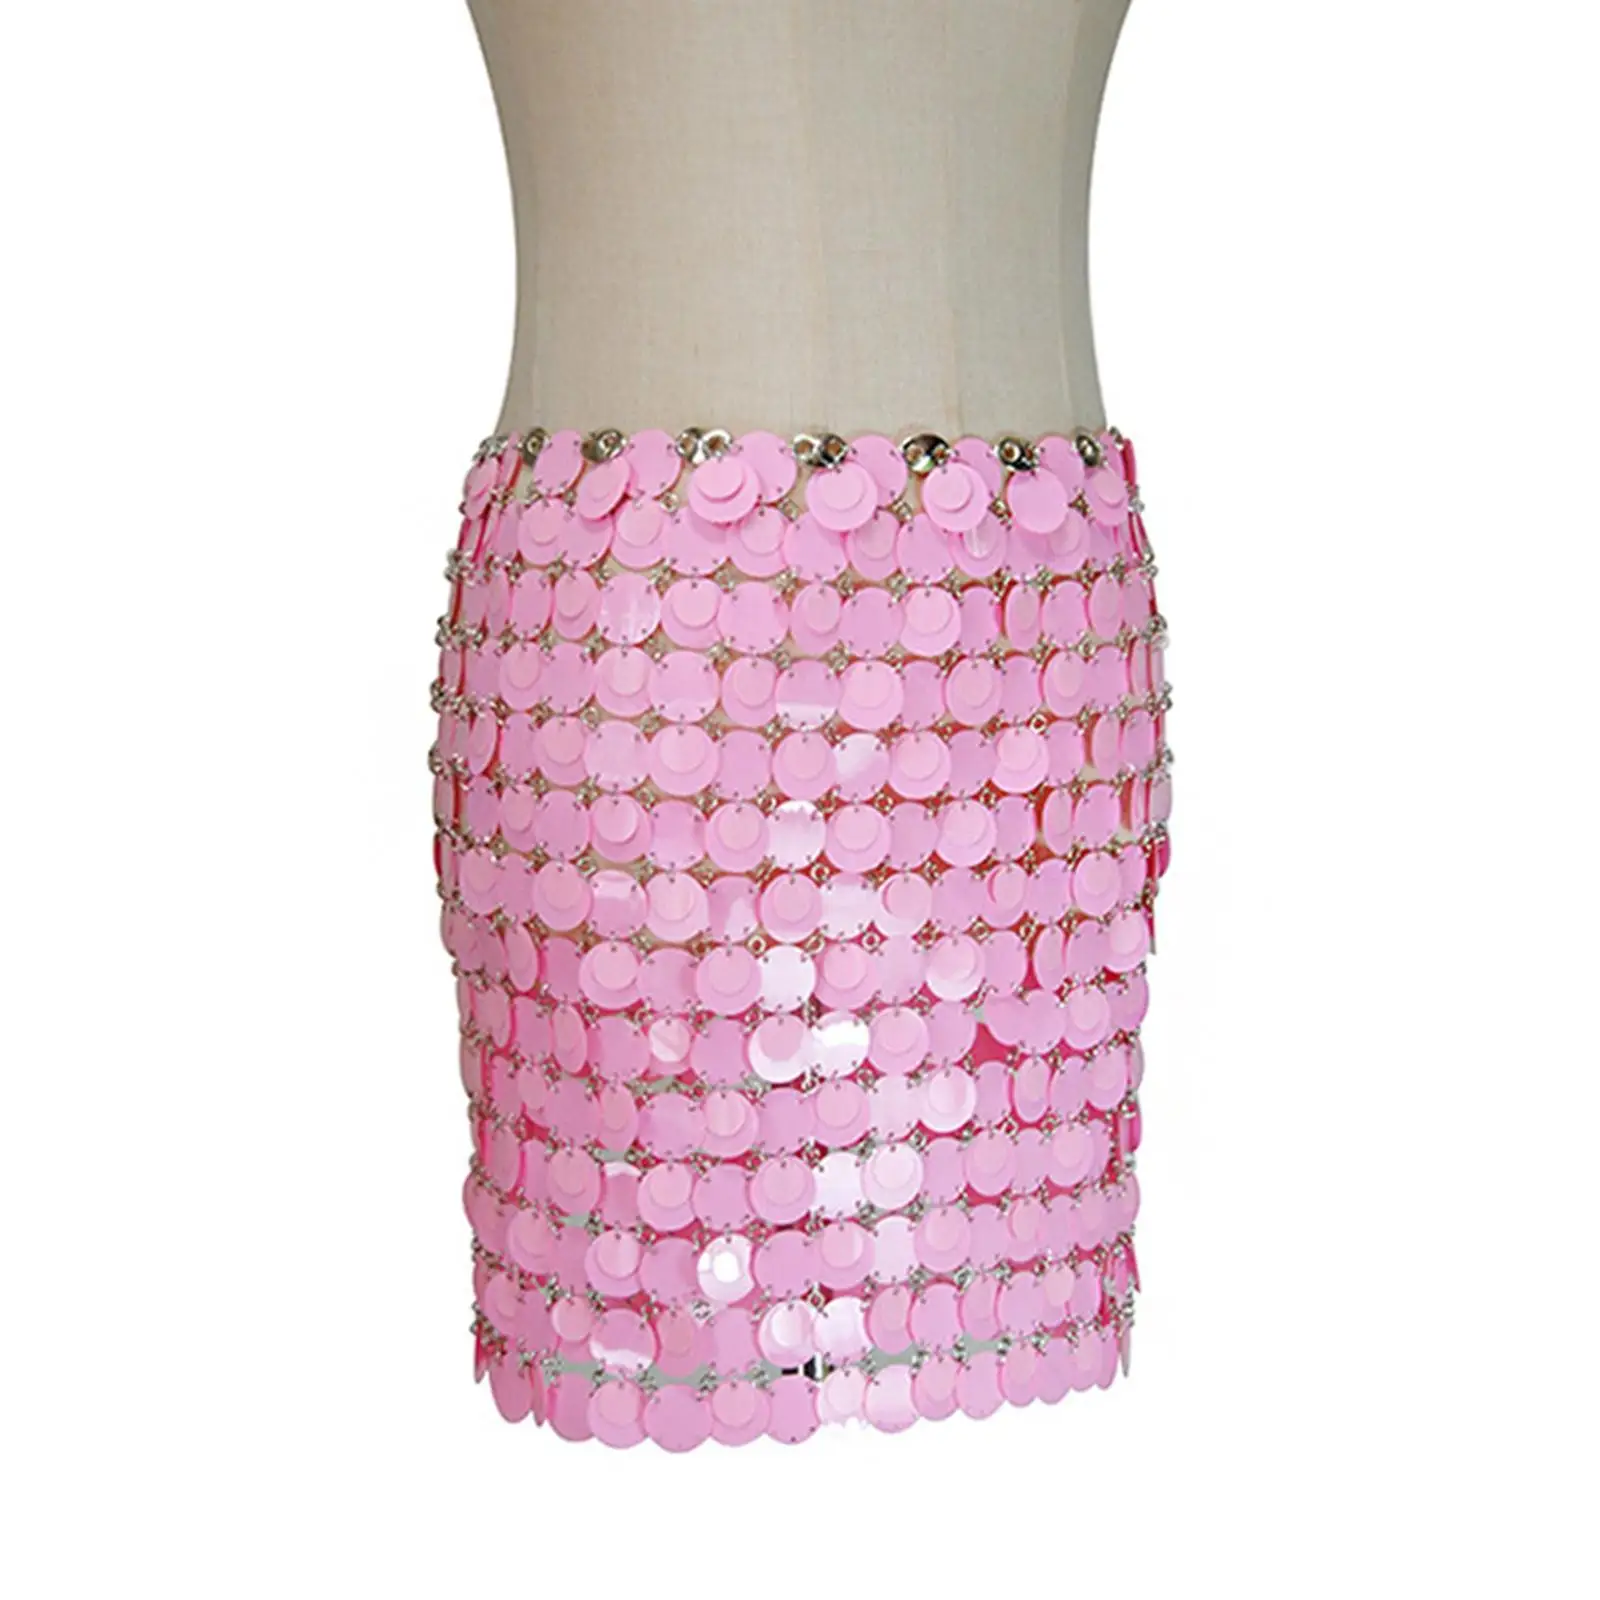 Fashion Sequins Skirt Sparkly Hip Skirts Glitter Skirts Costume Accessories for Nightclub Carnival Cosplay Masquerade Dance